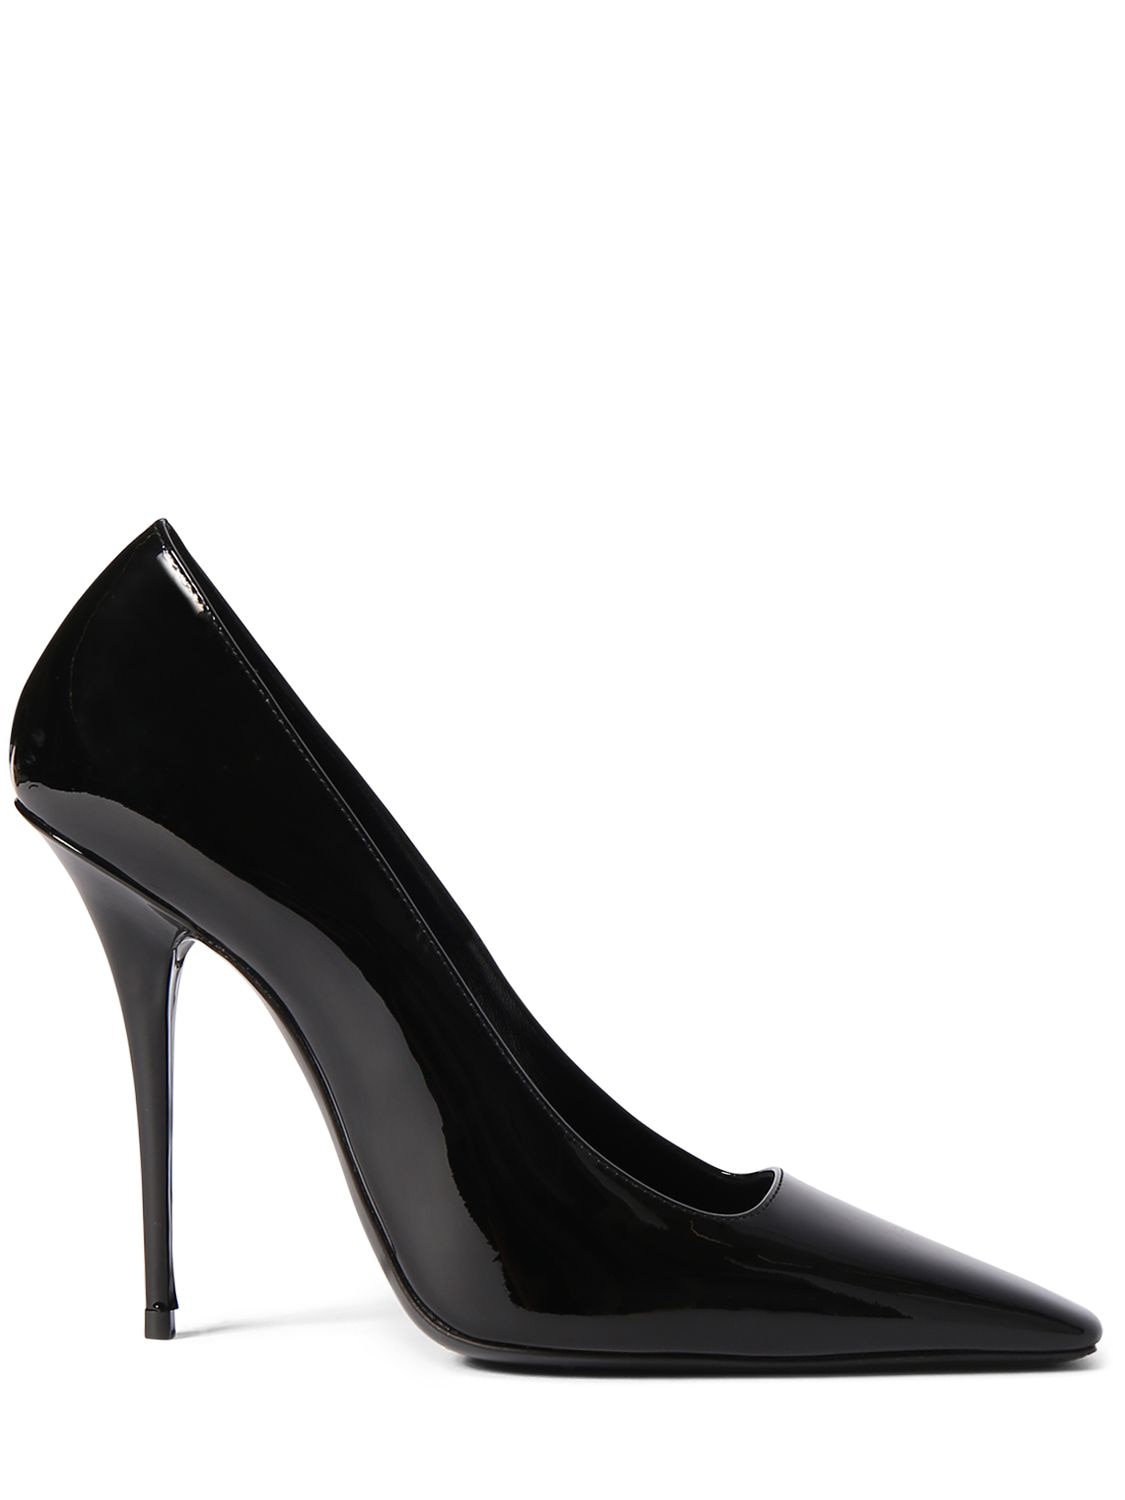 Image of 110mm Blade Patent Leather Pumps